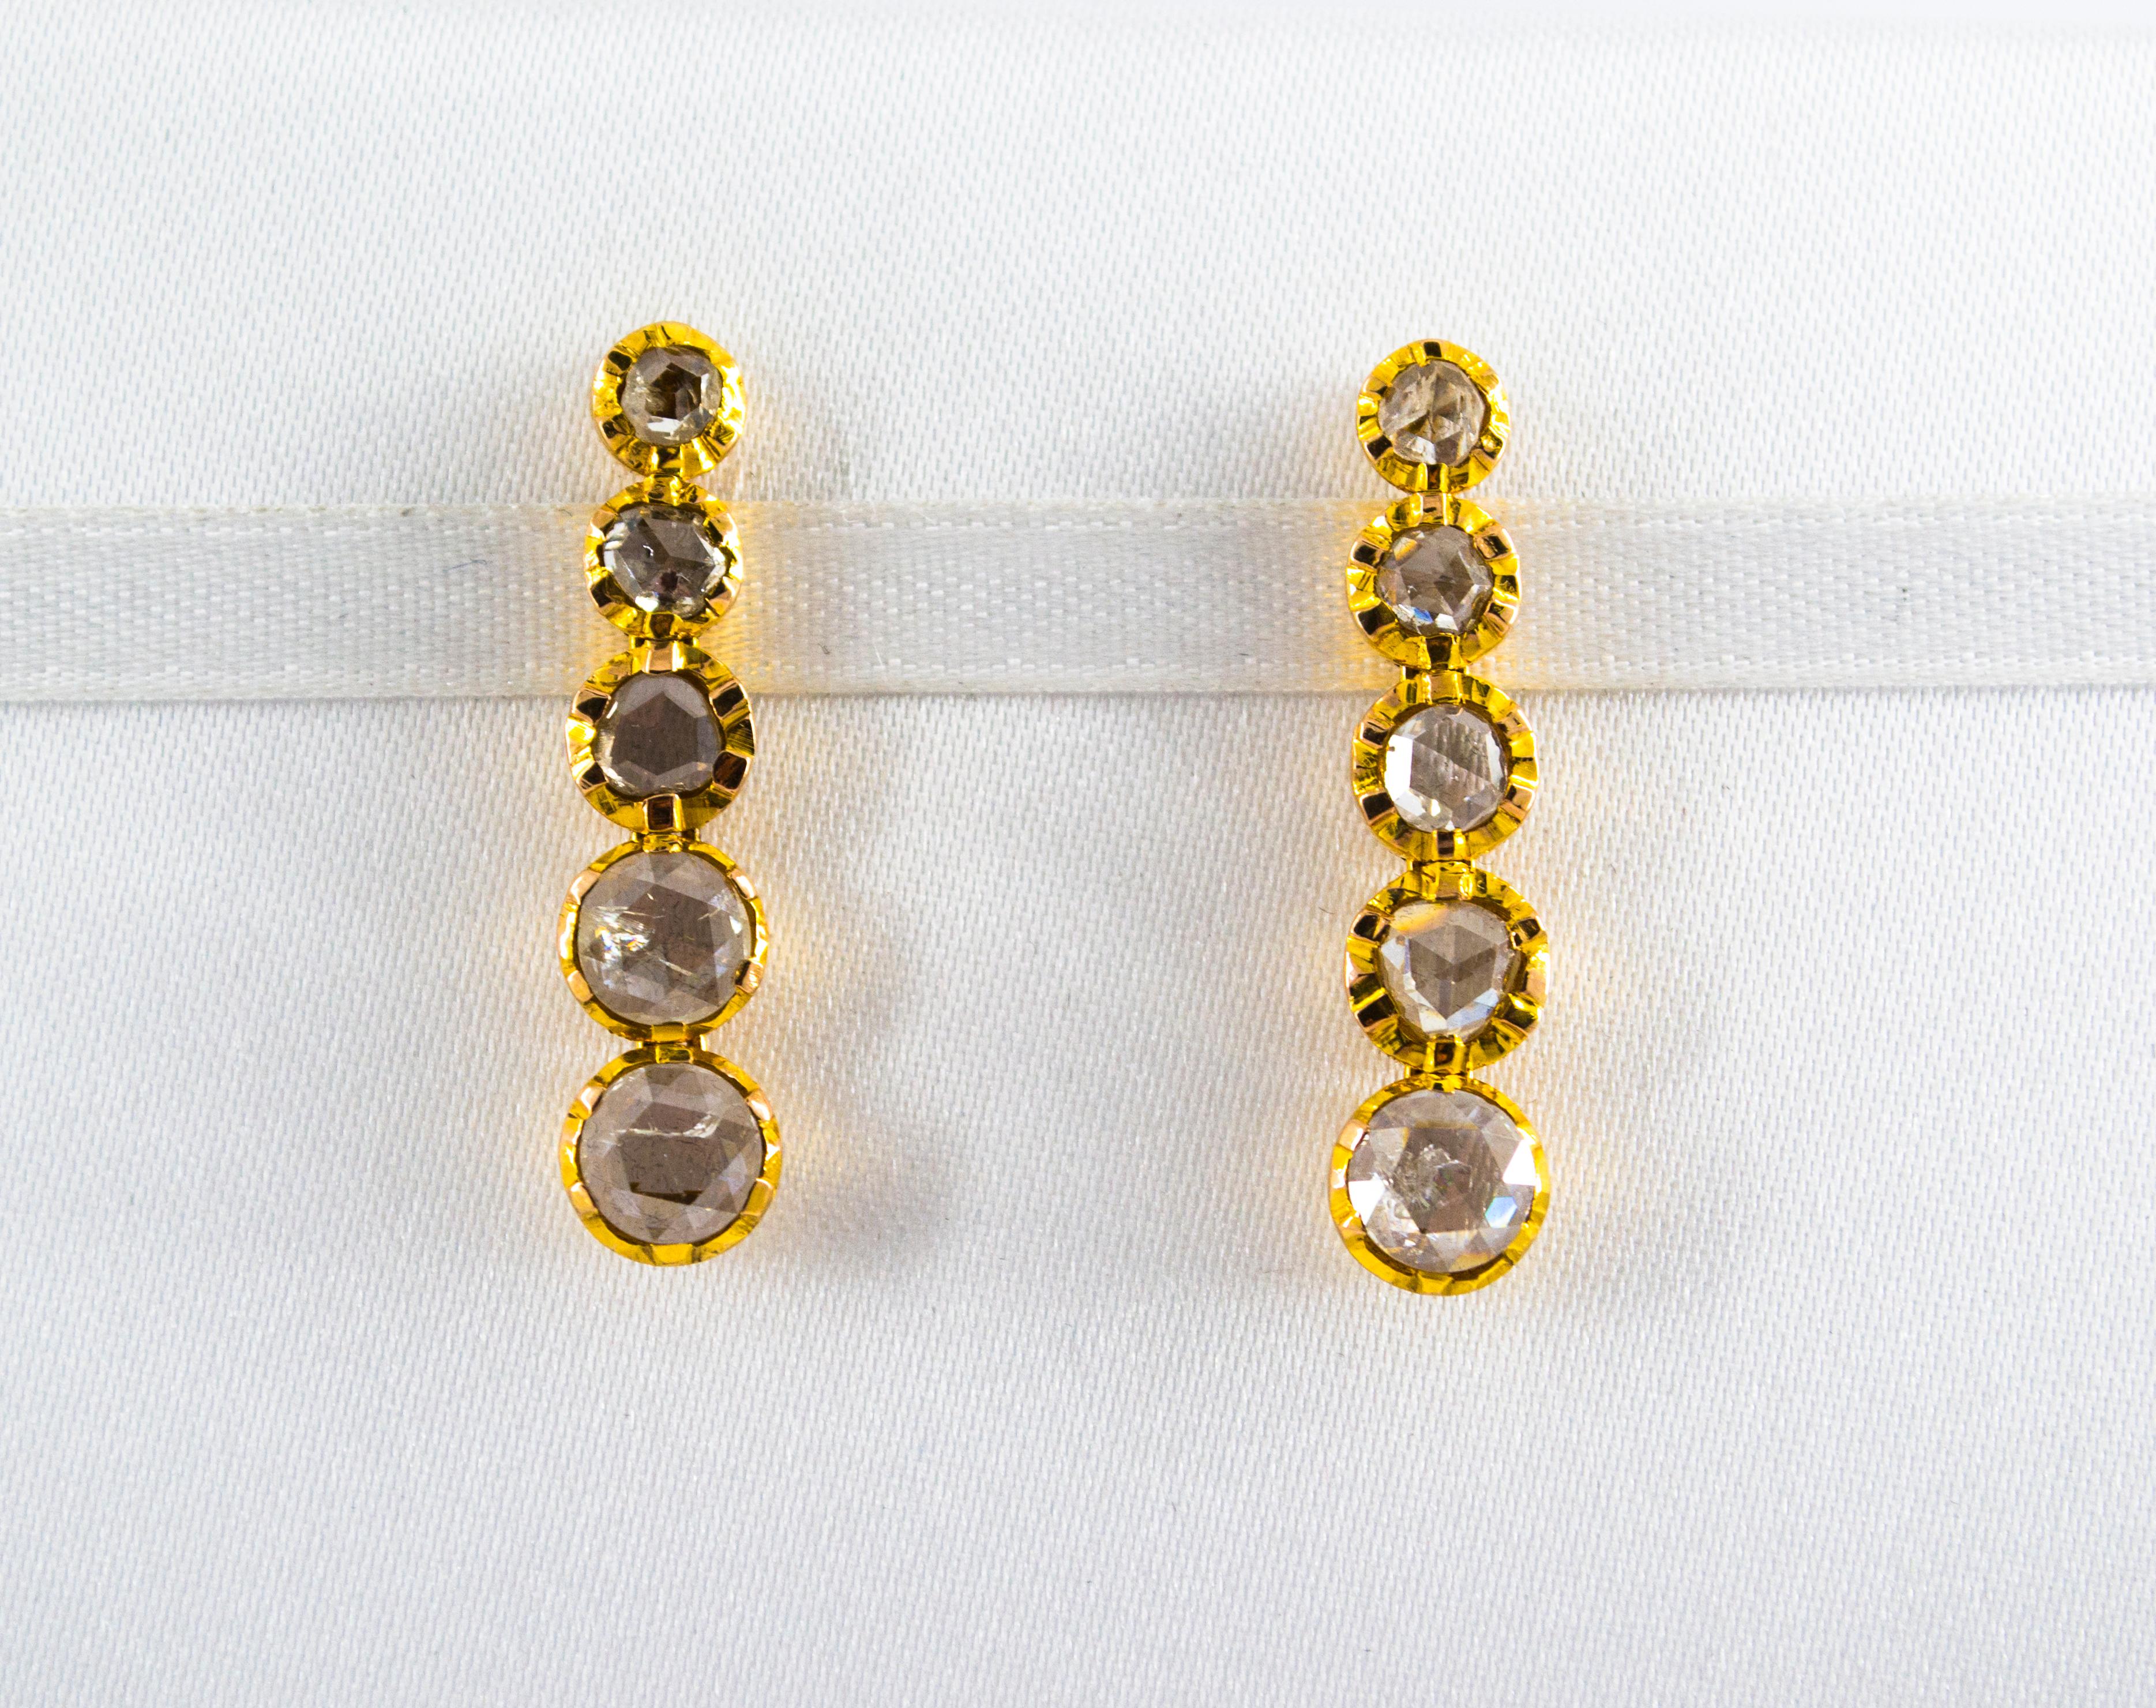 These Earrings are made of 9K Yellow Gold.
These Earrings have 2.90 Carats of White Diamonds (Old European Cut).
These Earrings are inspired by Renaissance Movement.
We're a workshop so every piece is handmade, customizable and resizable.